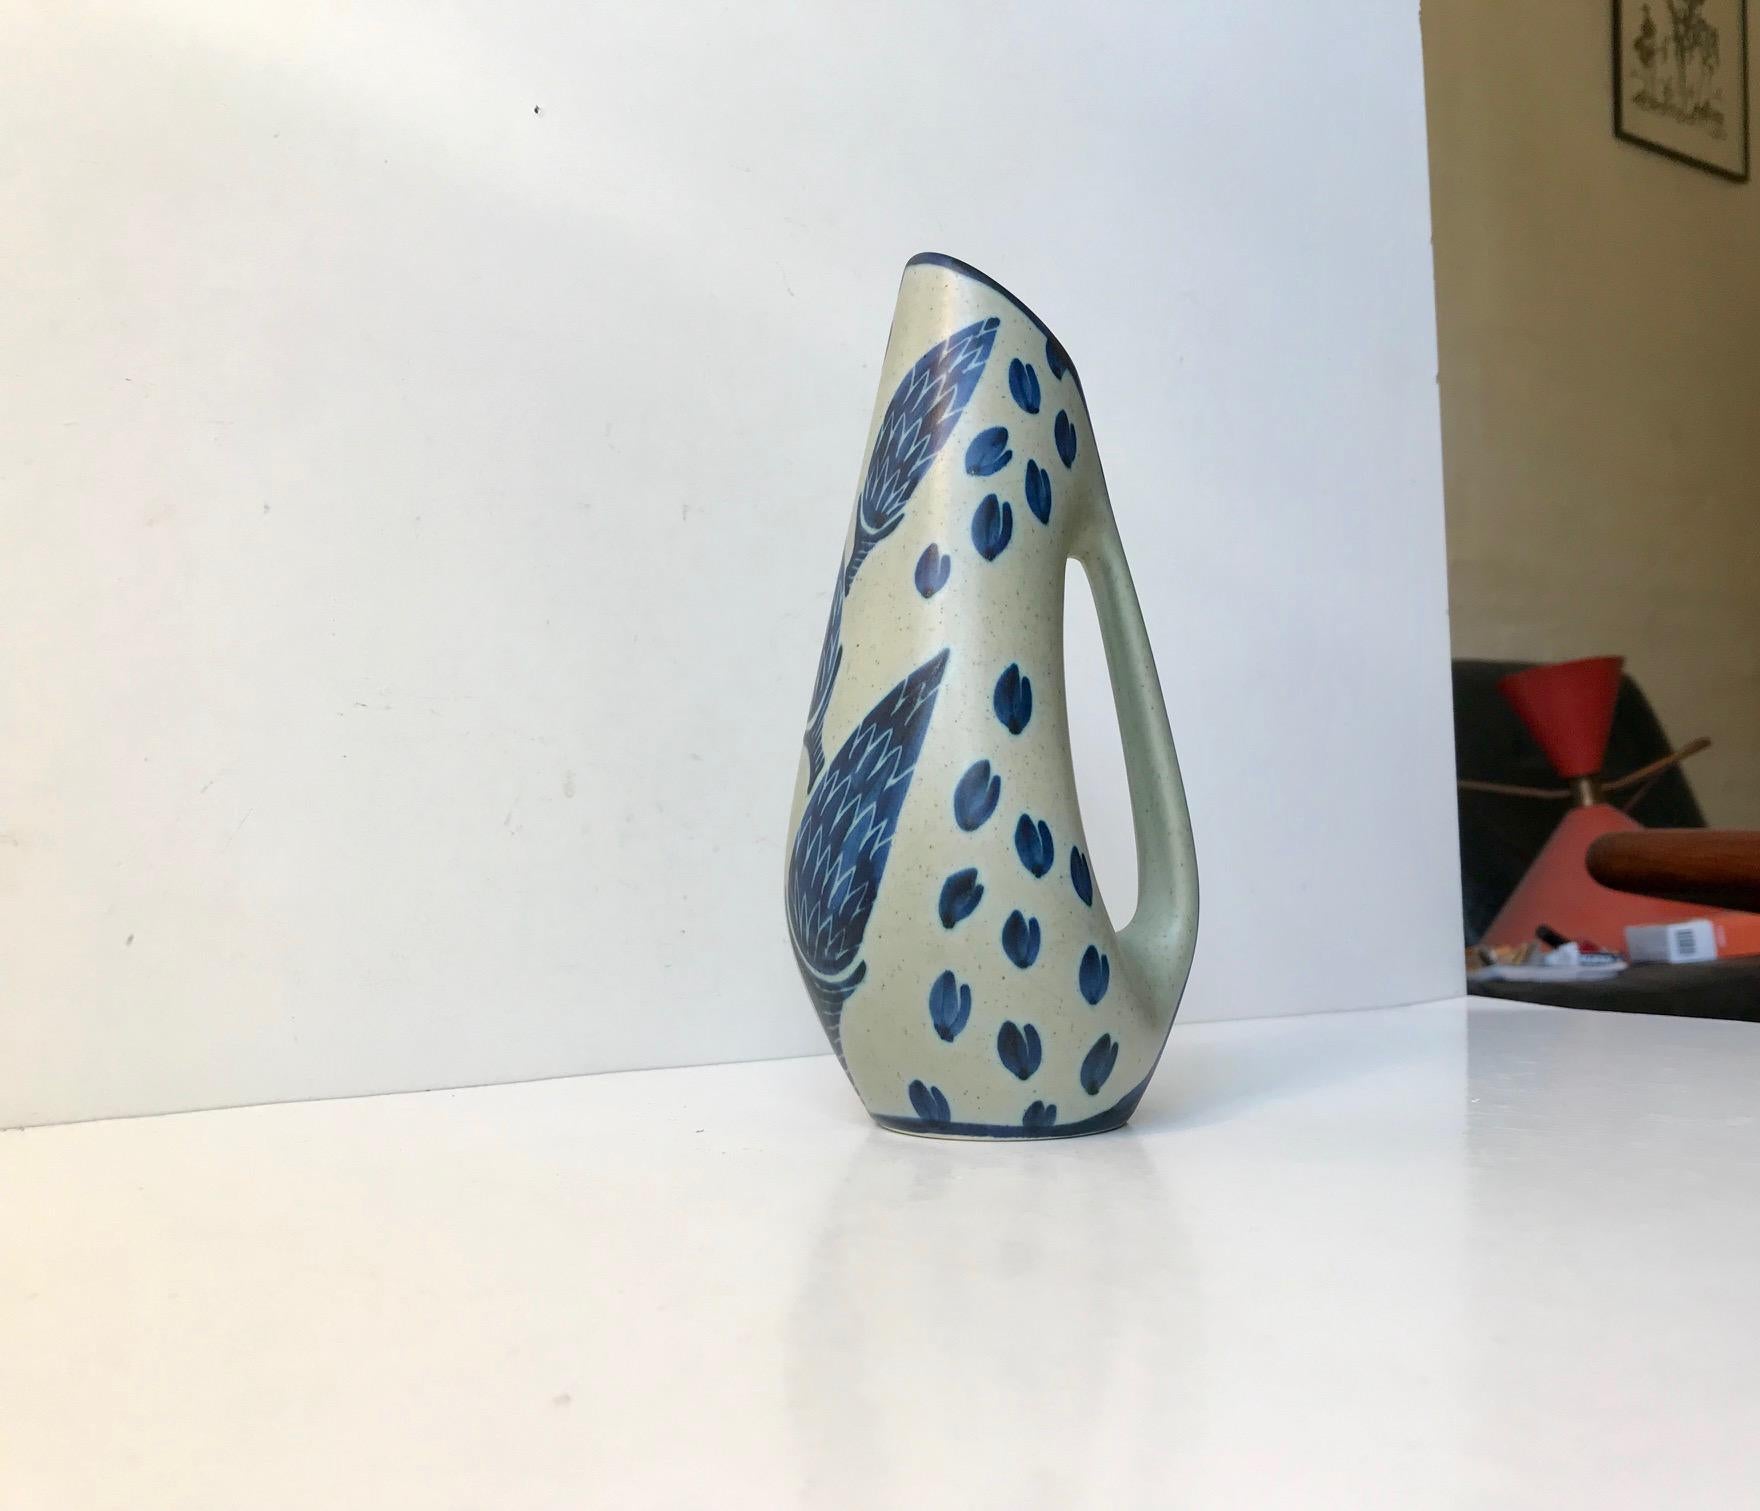 This hand painted ceramic jug vase was designed by the Danish ceramist Einar Johansen and manufactured at Søholm in Denmark during the 1960s. Søholm also made ceramic pieces by Nanna Ditzel and Svend Aage Holm-Sorensen and this jug vase is a flower